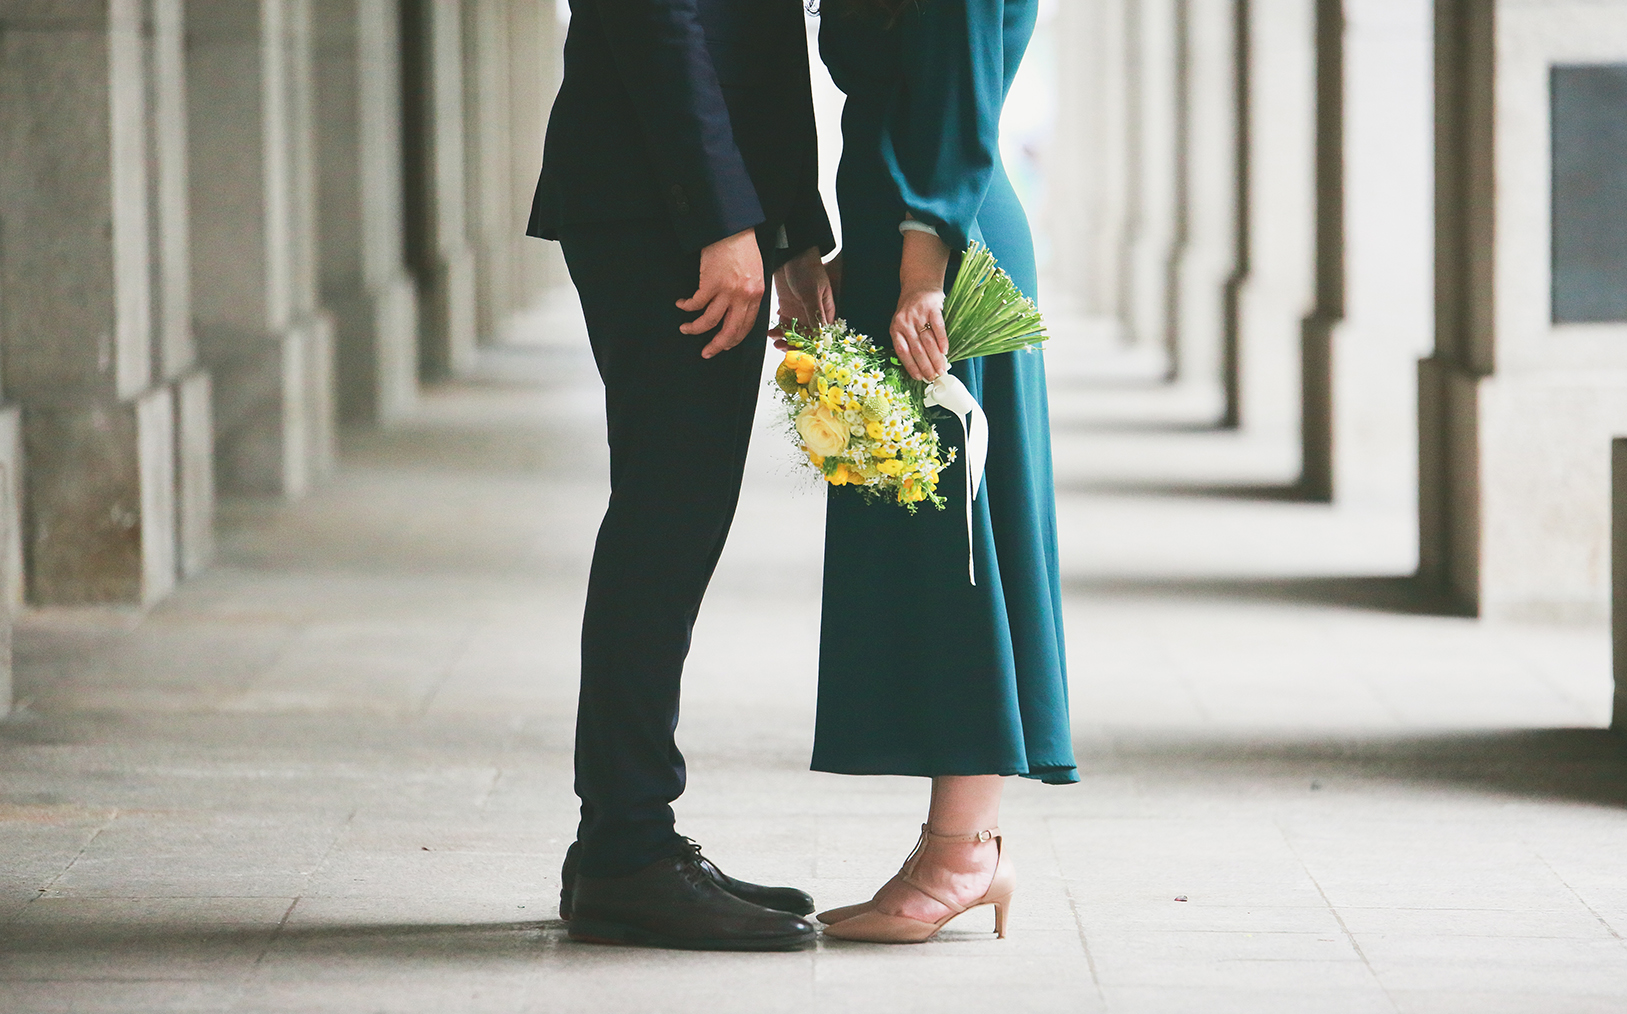 What to wear for your Engagement Shoot